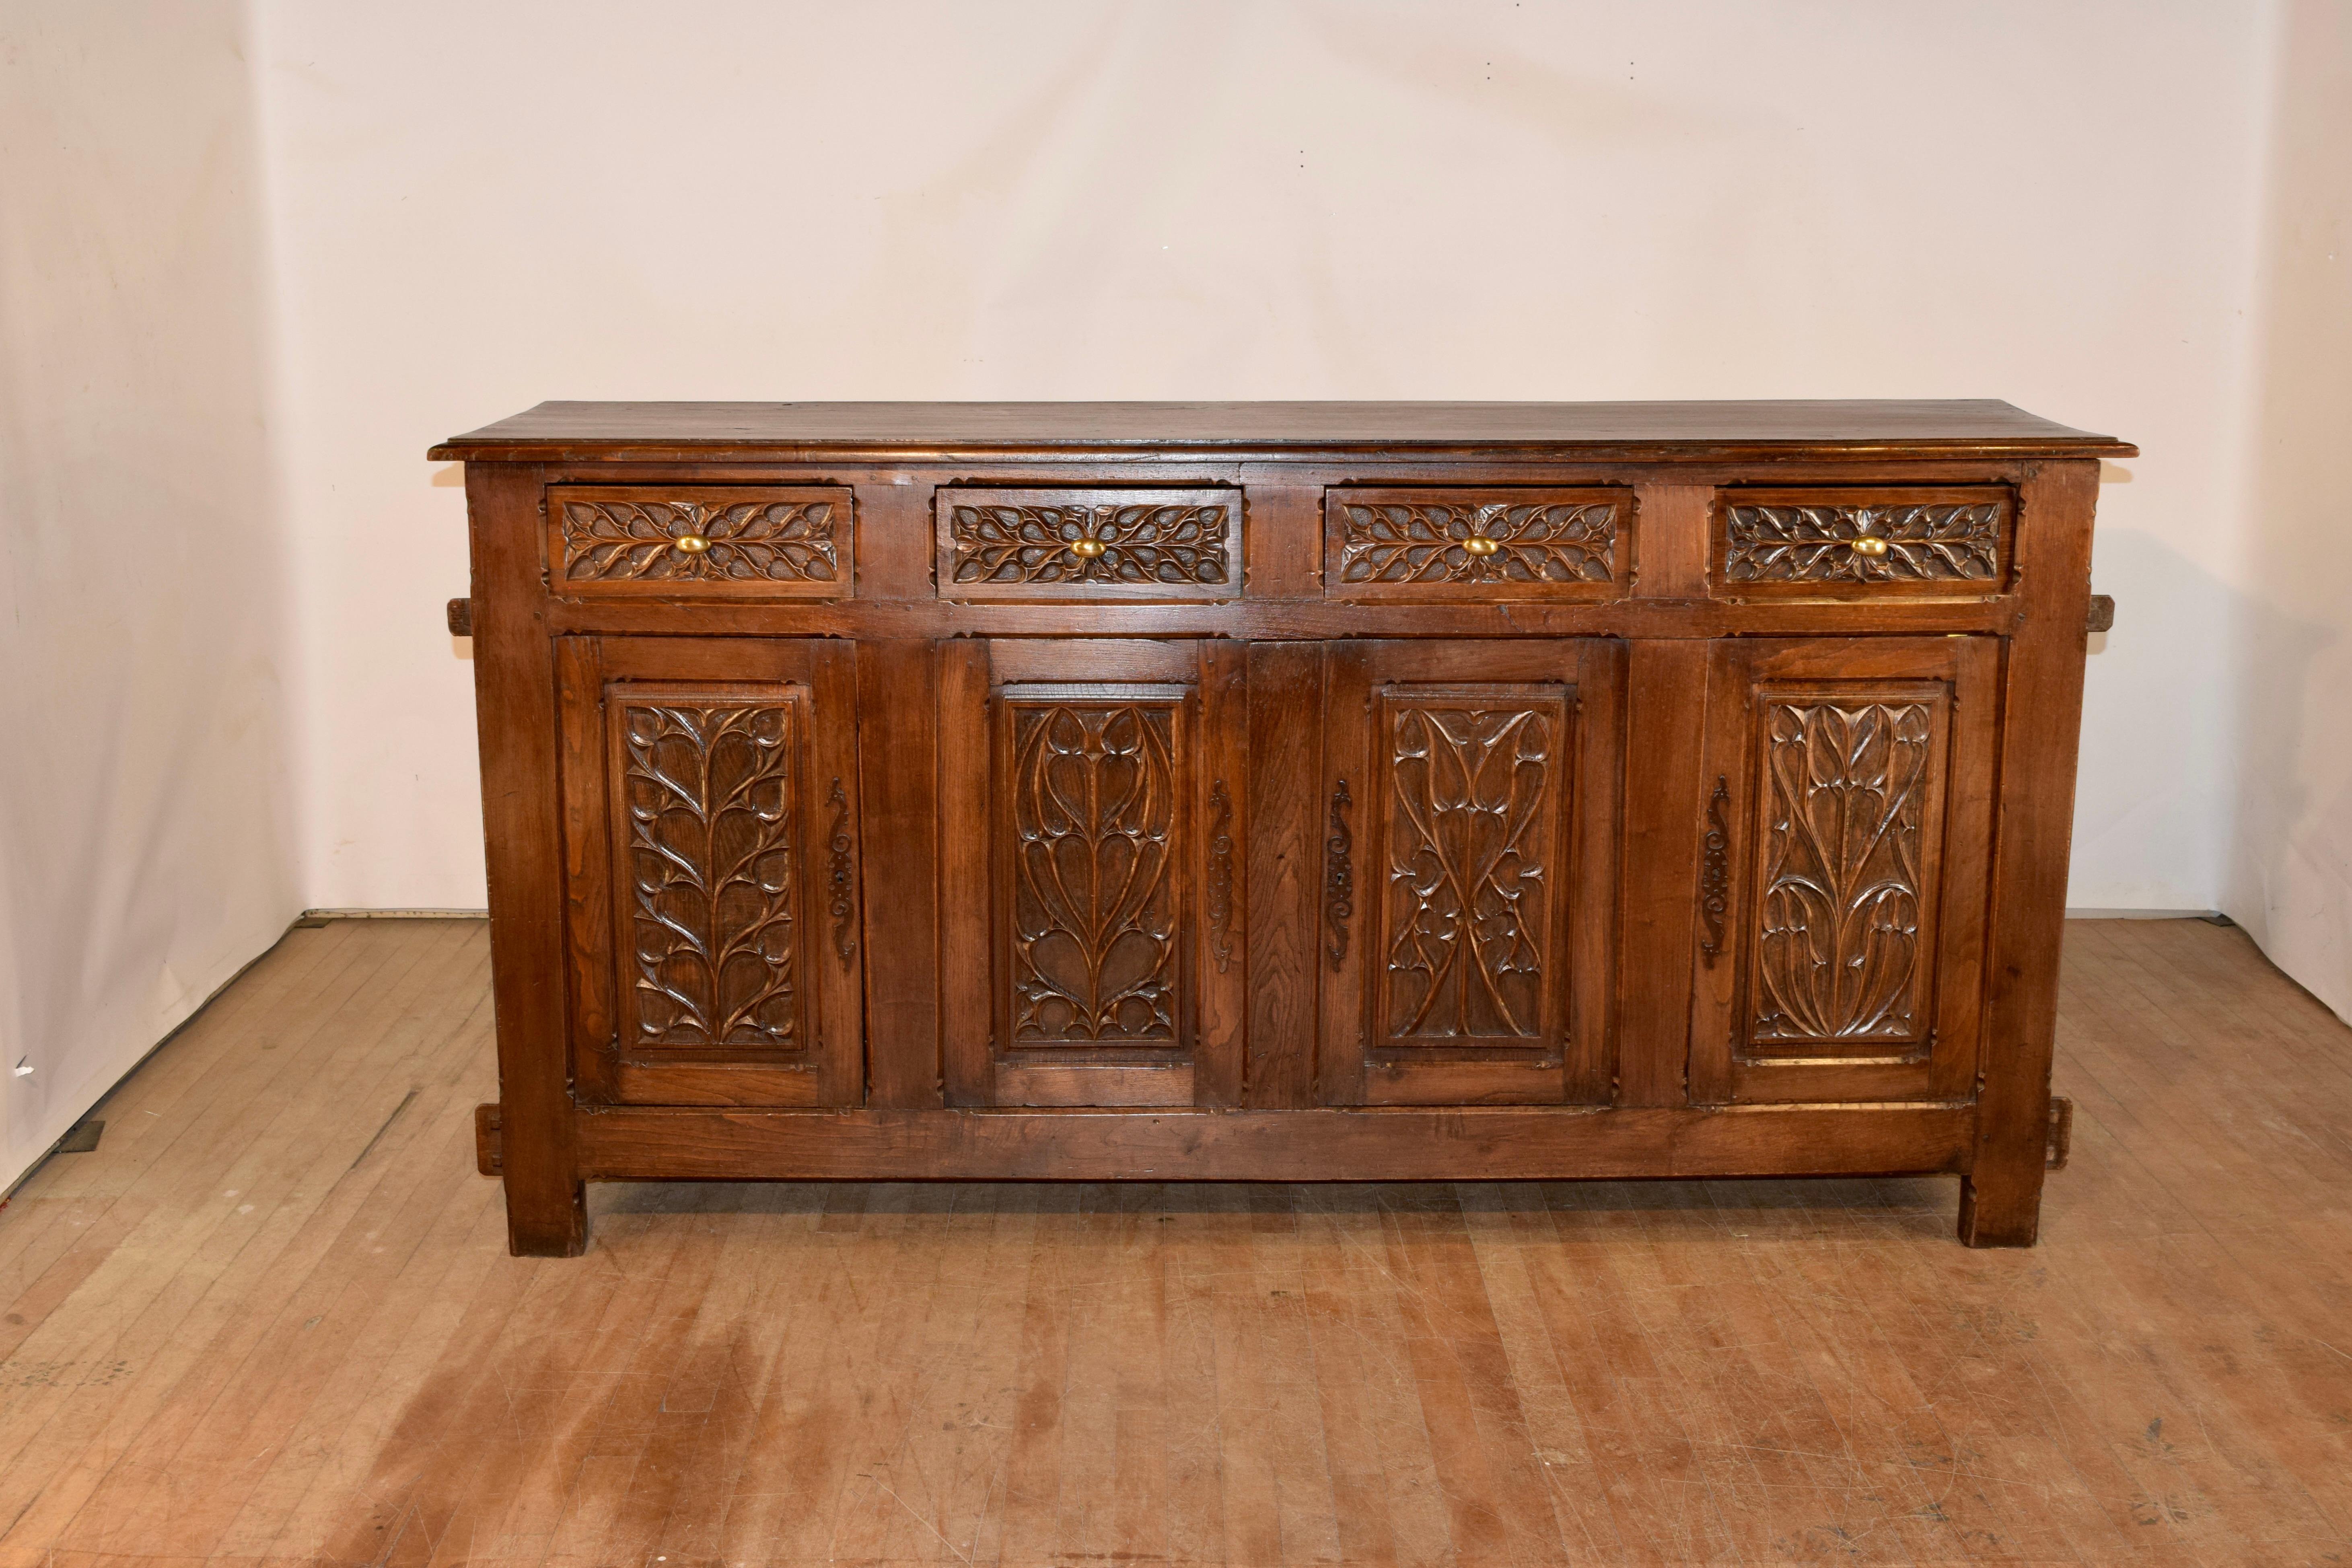 19th century French gothic enfilade with a plank top which has a beveled edge, following down to lovely hand paneled sides and four drawers over four doors in the front. The drawer fronts and door panels are exquisitely hand carved, and the doors